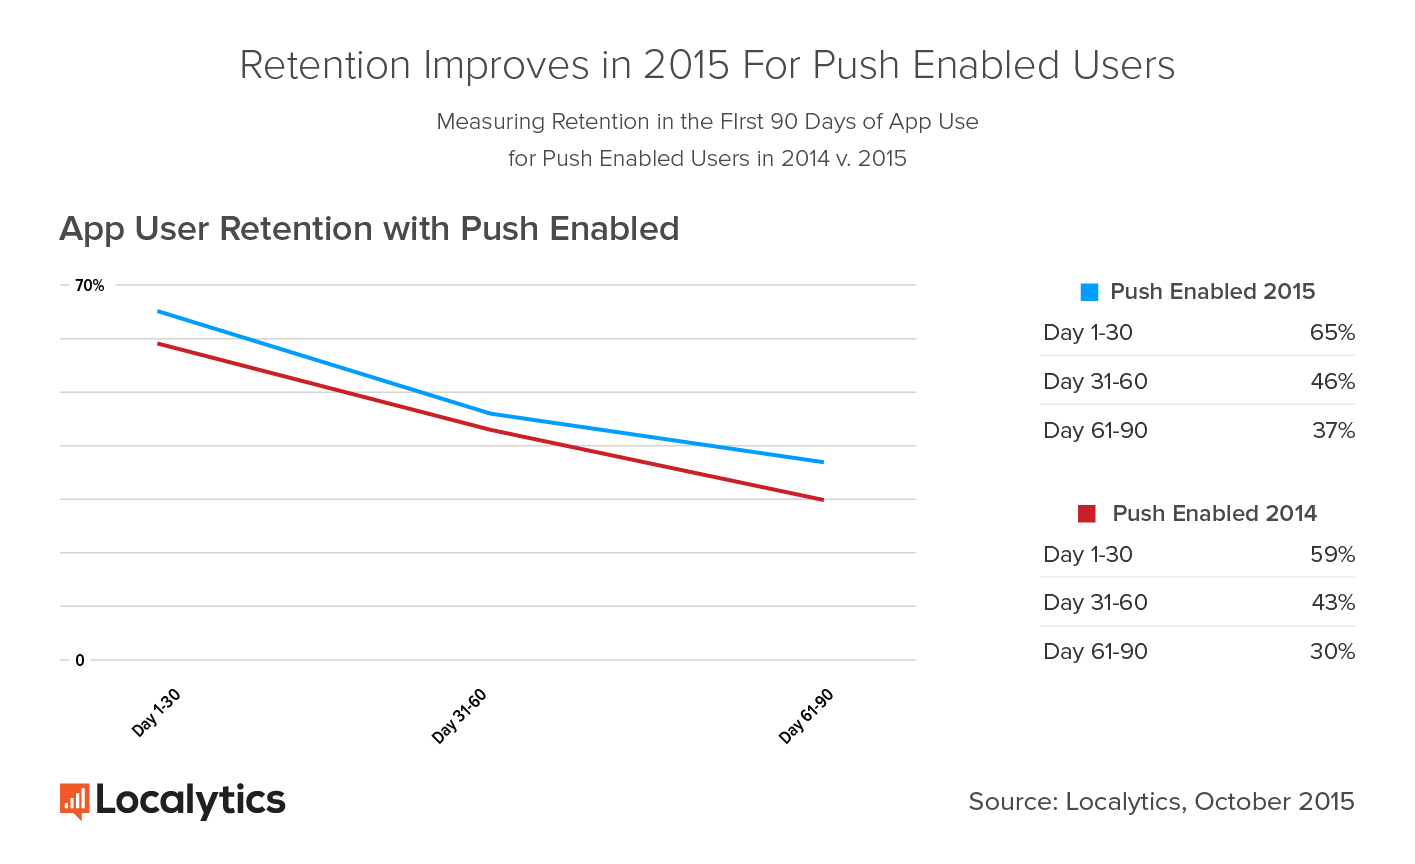 Retention-with-Push-Enabled-2014-2015